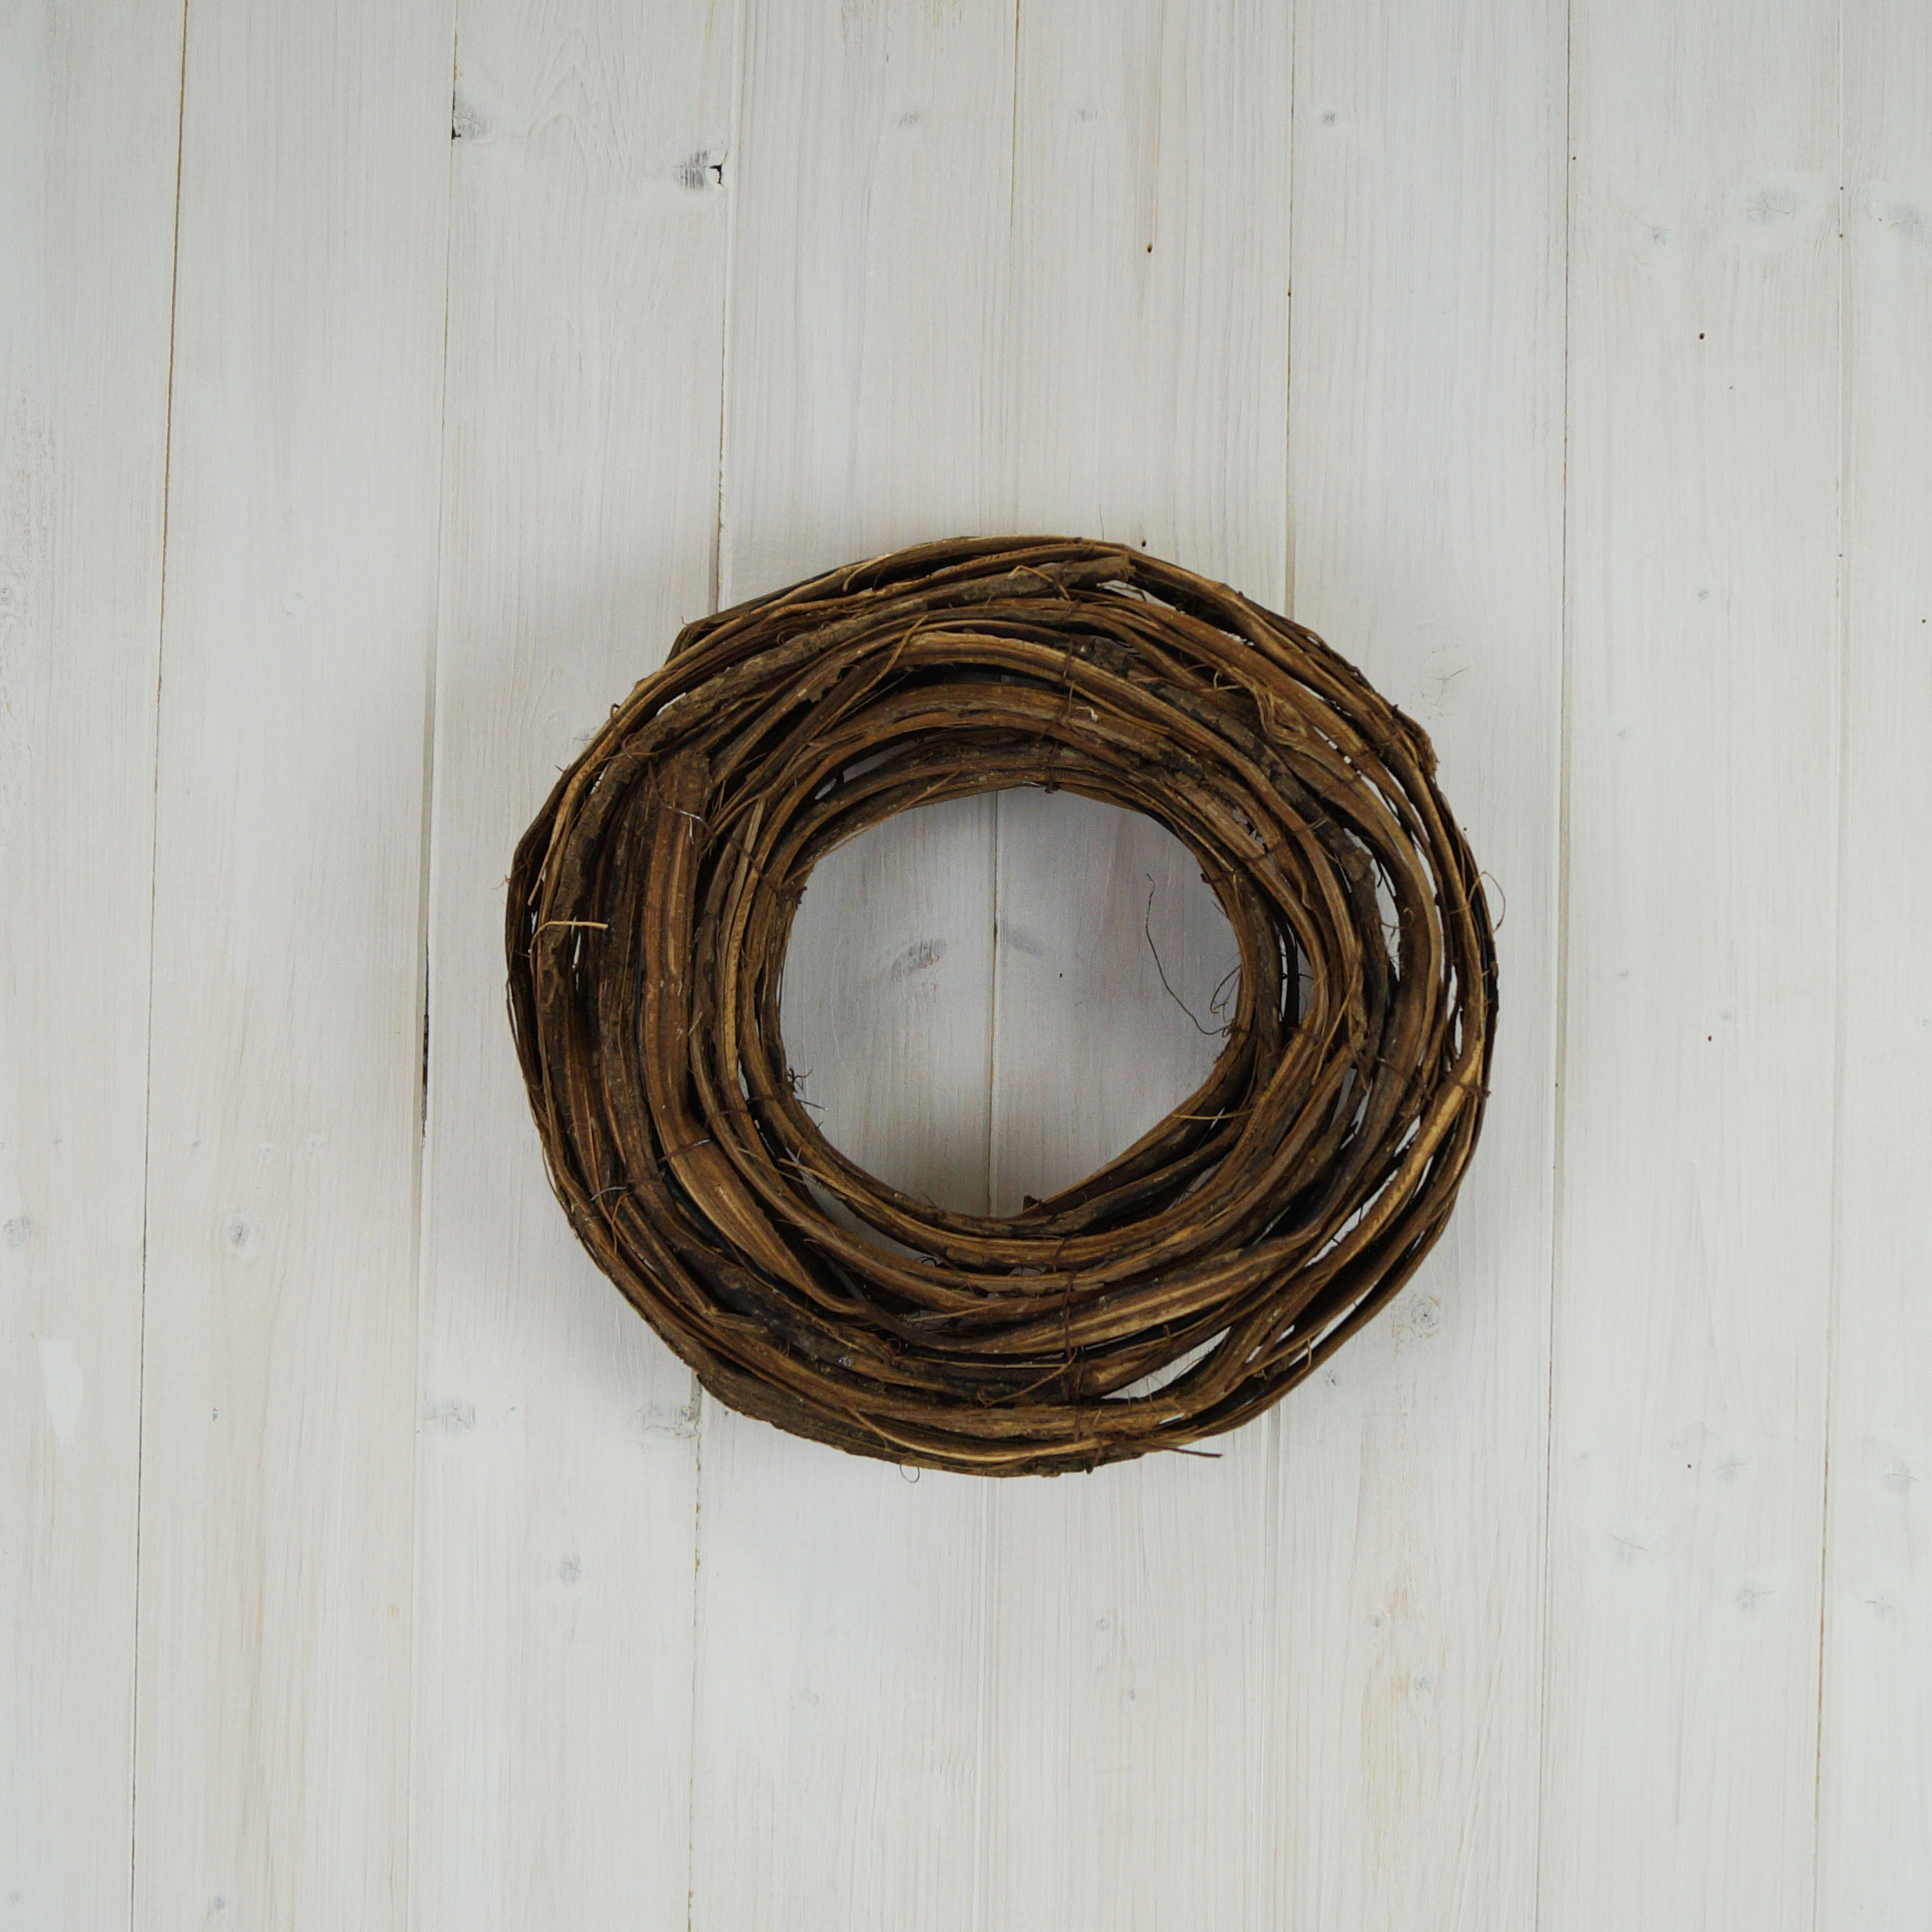 Small Rustic Natural Rattan Wreath detail page